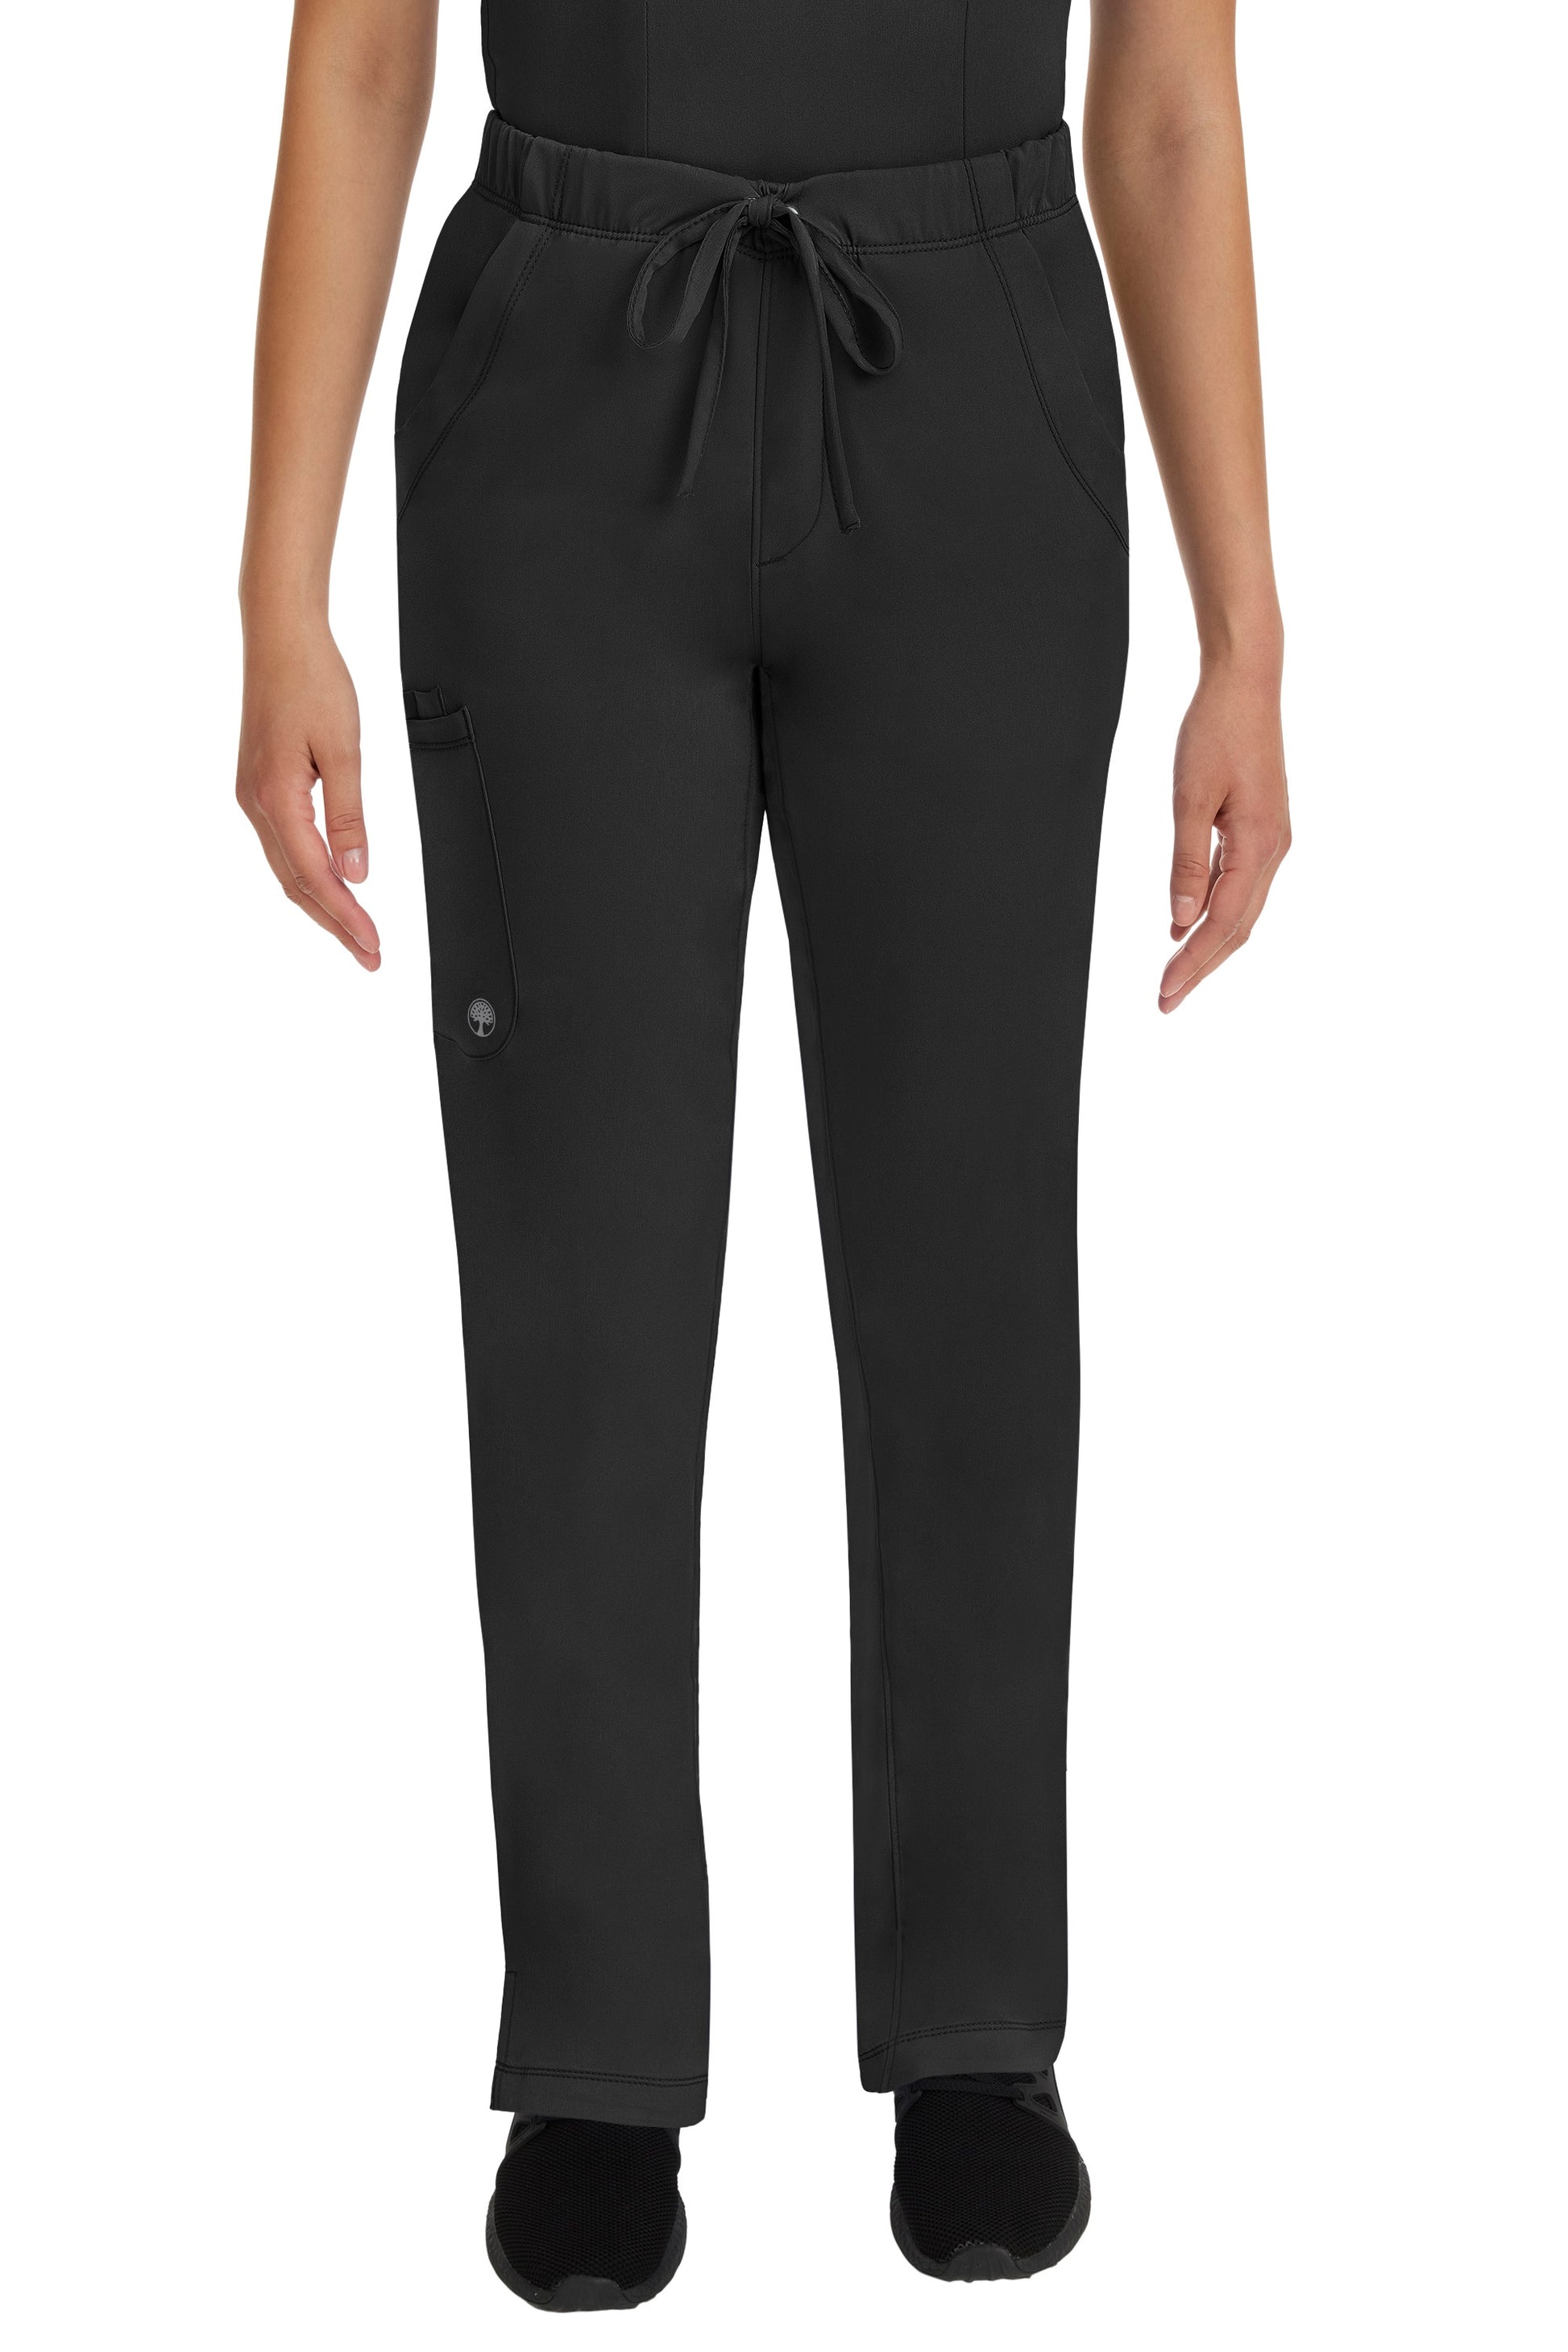 Healing Hands HH Works Rebecca Tall Scrub Pant in Black at Parker's Clothing and Shoes.